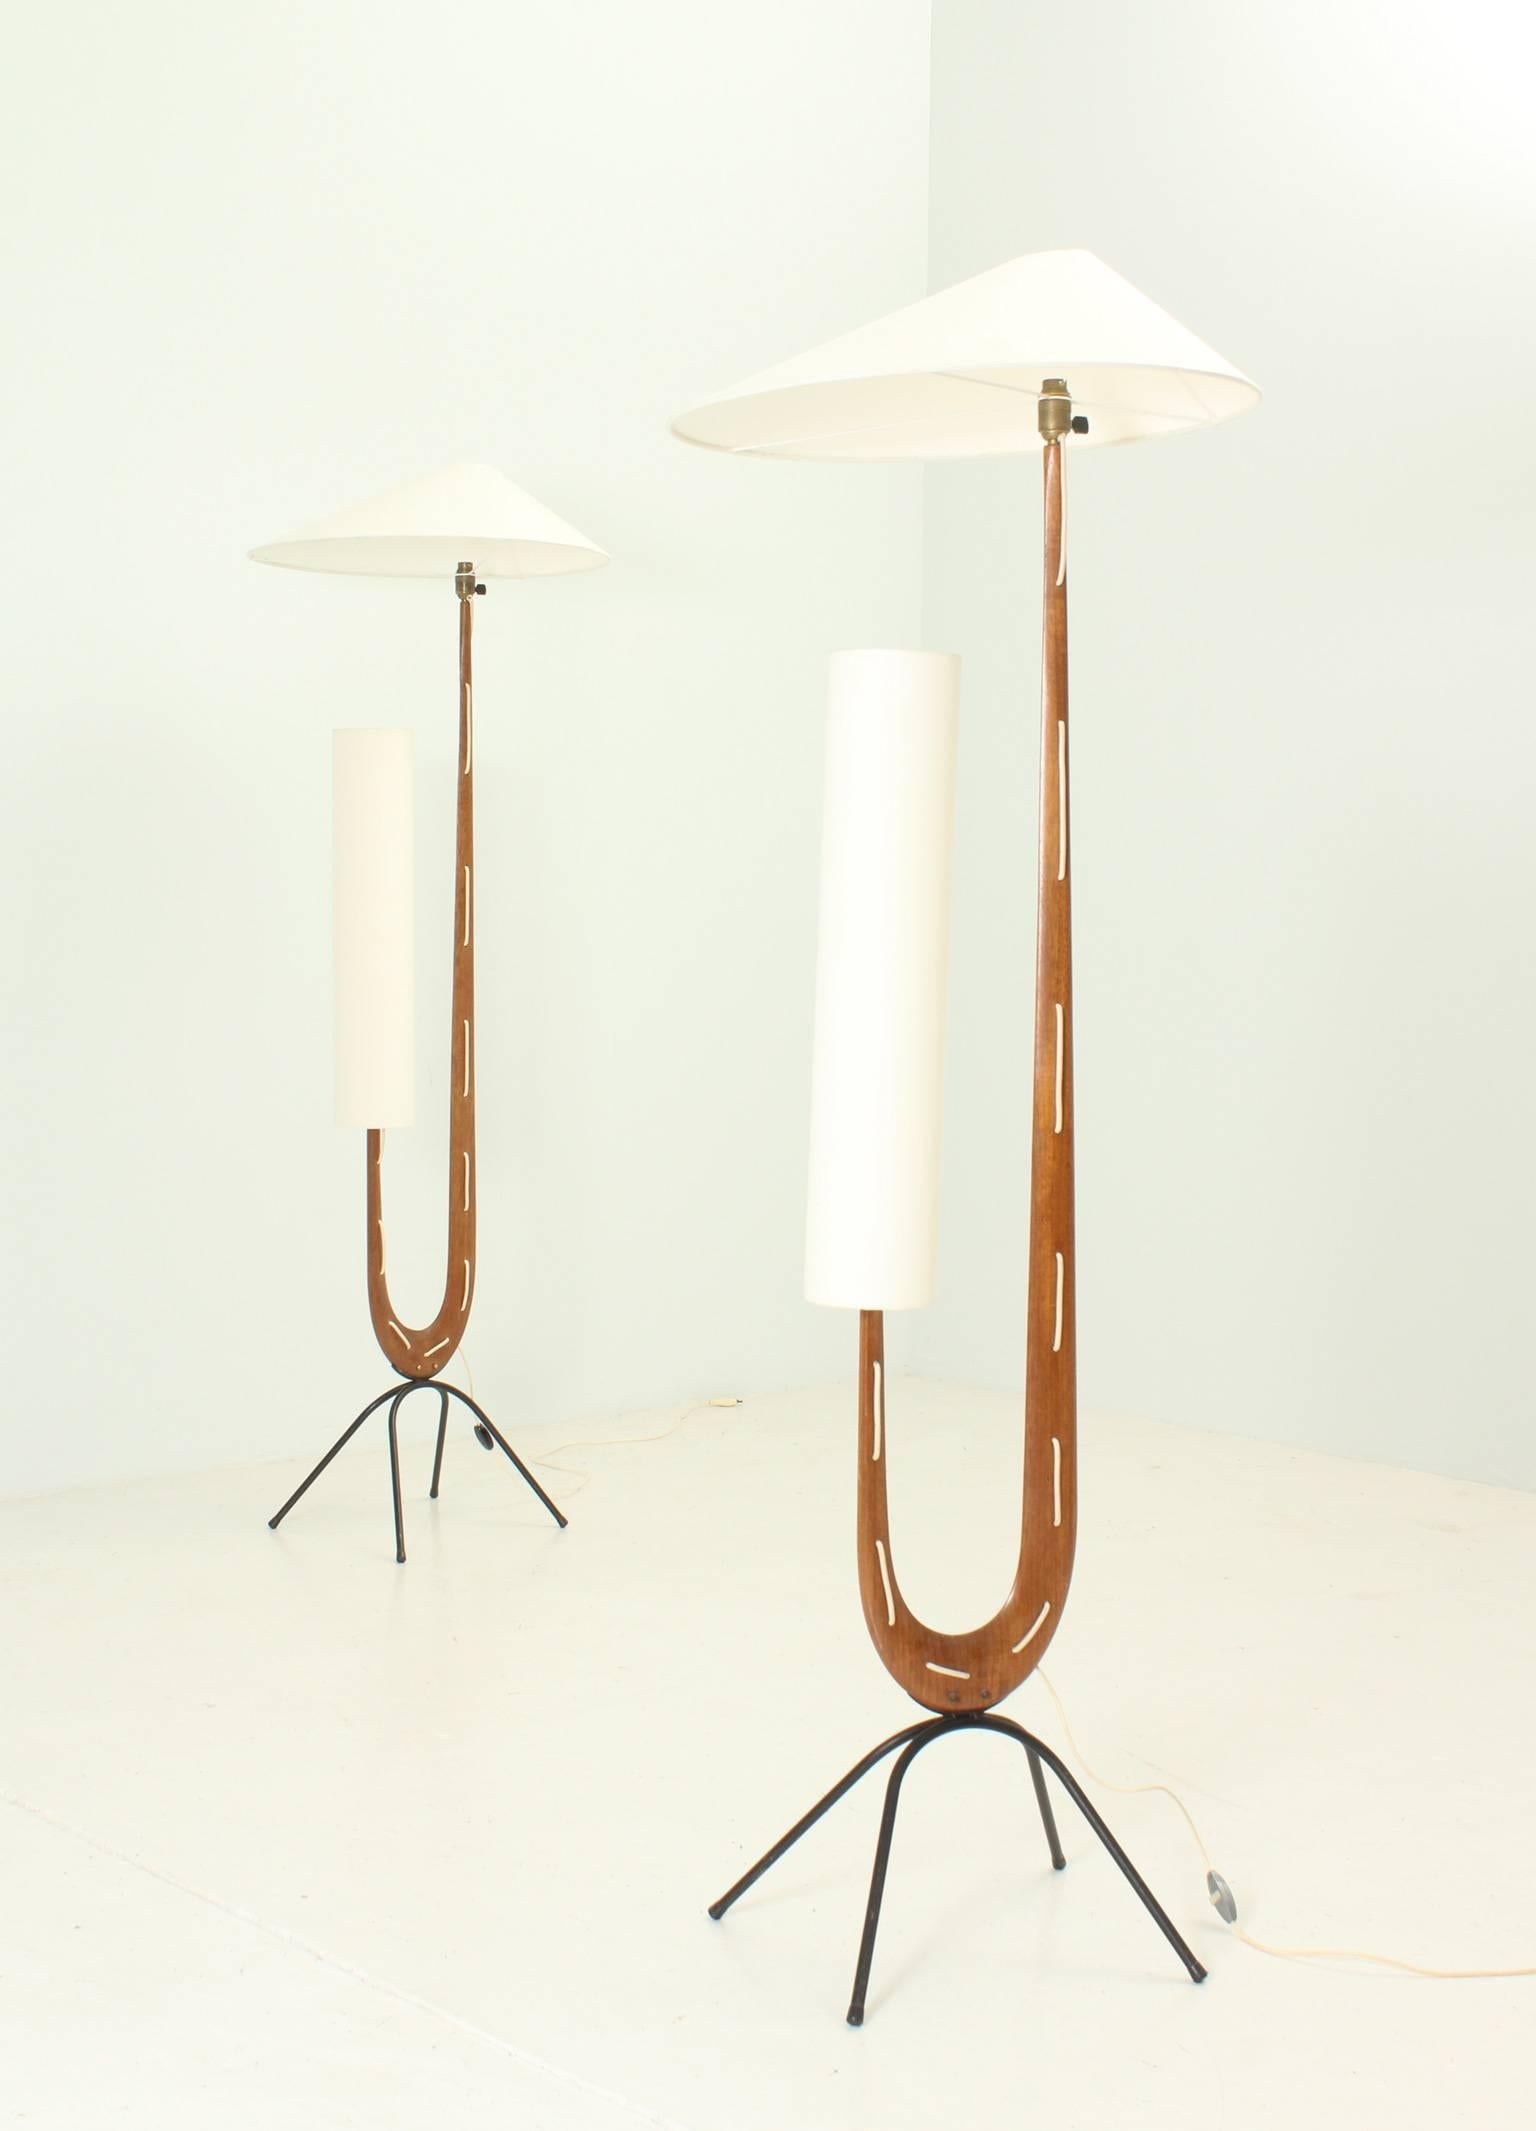 Pair of Giraffe floor lamps designed in 1950s by Jean Rispal, France. Teakwood with black iron bases, original shades with new fabric.